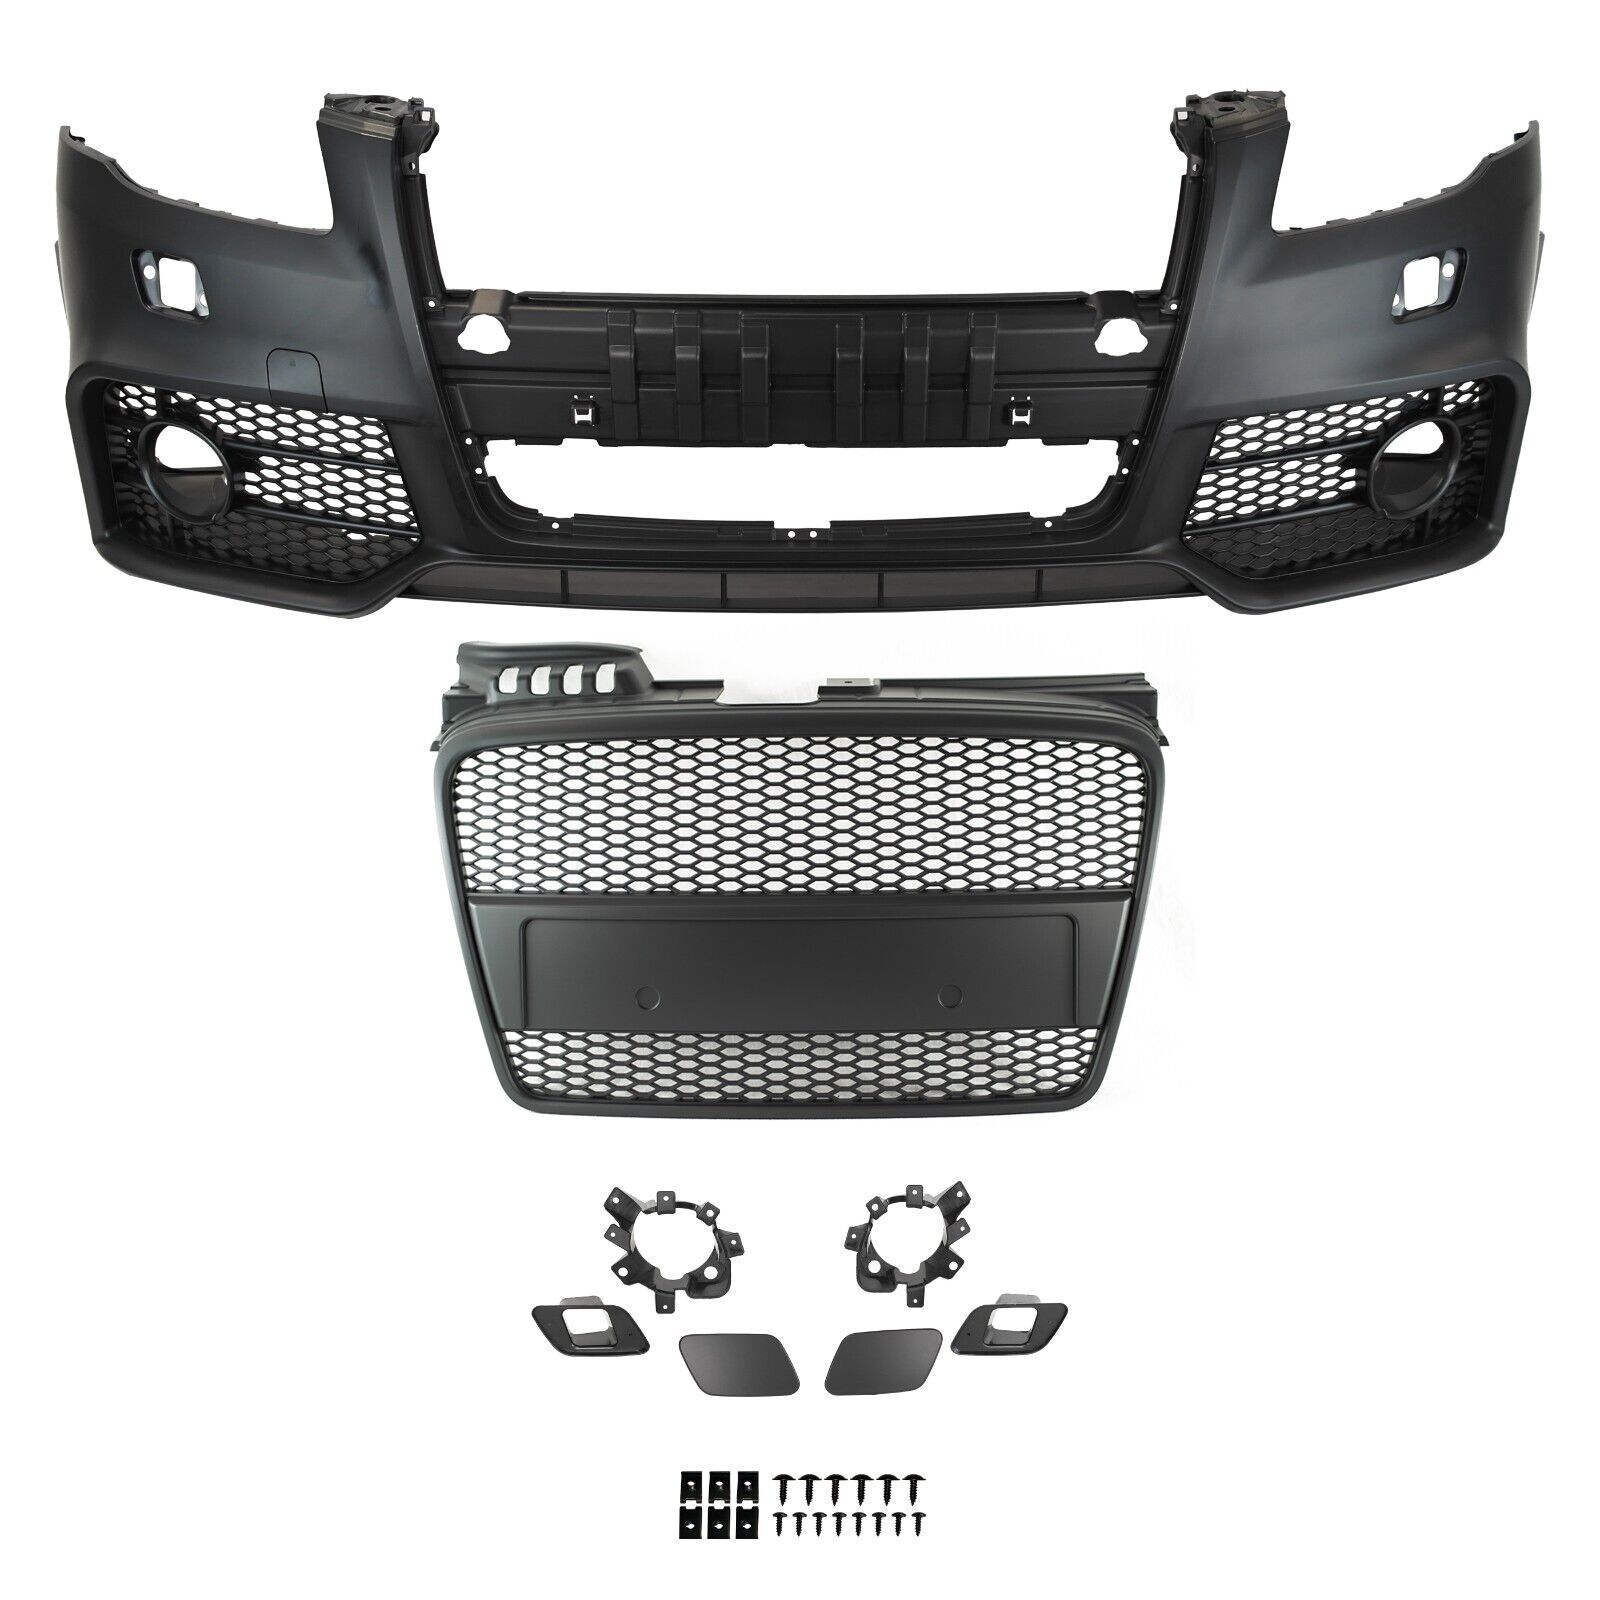 For 05-08 Audi B7 A4, RS4 Style Front Bumper with Black Front Grille